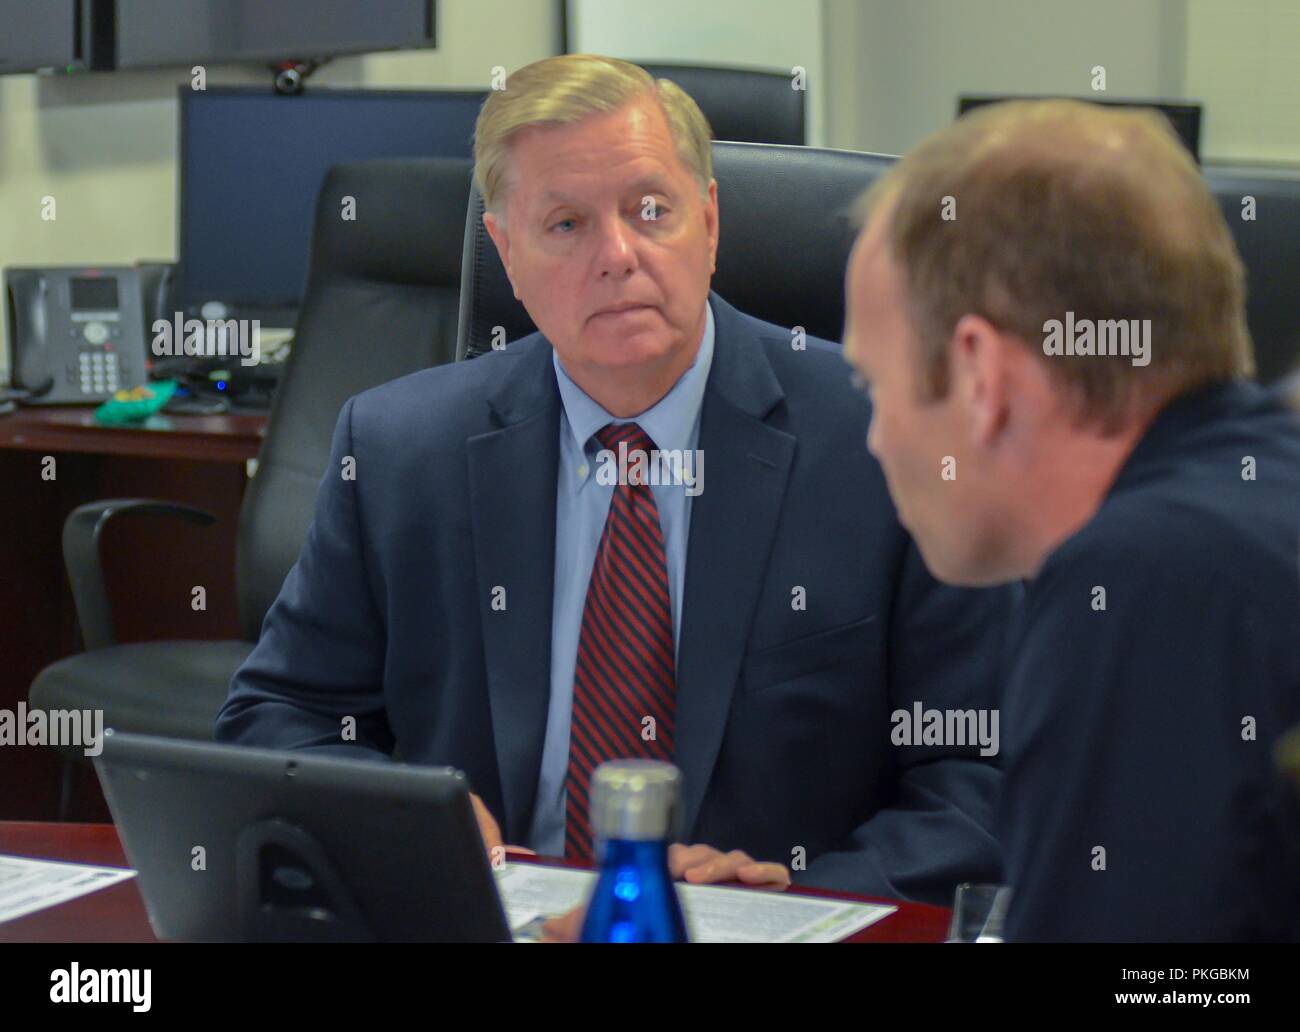 FEMA Administrator Brock Long, right, briefs U.S. Sen. Lindsey Graham of South Carolina to discuss the efforts of FEMA and federal partners in support of Hurricane Florence at the National Response Coordination Center September 13, 2018 in Washington, DC. Stock Photo